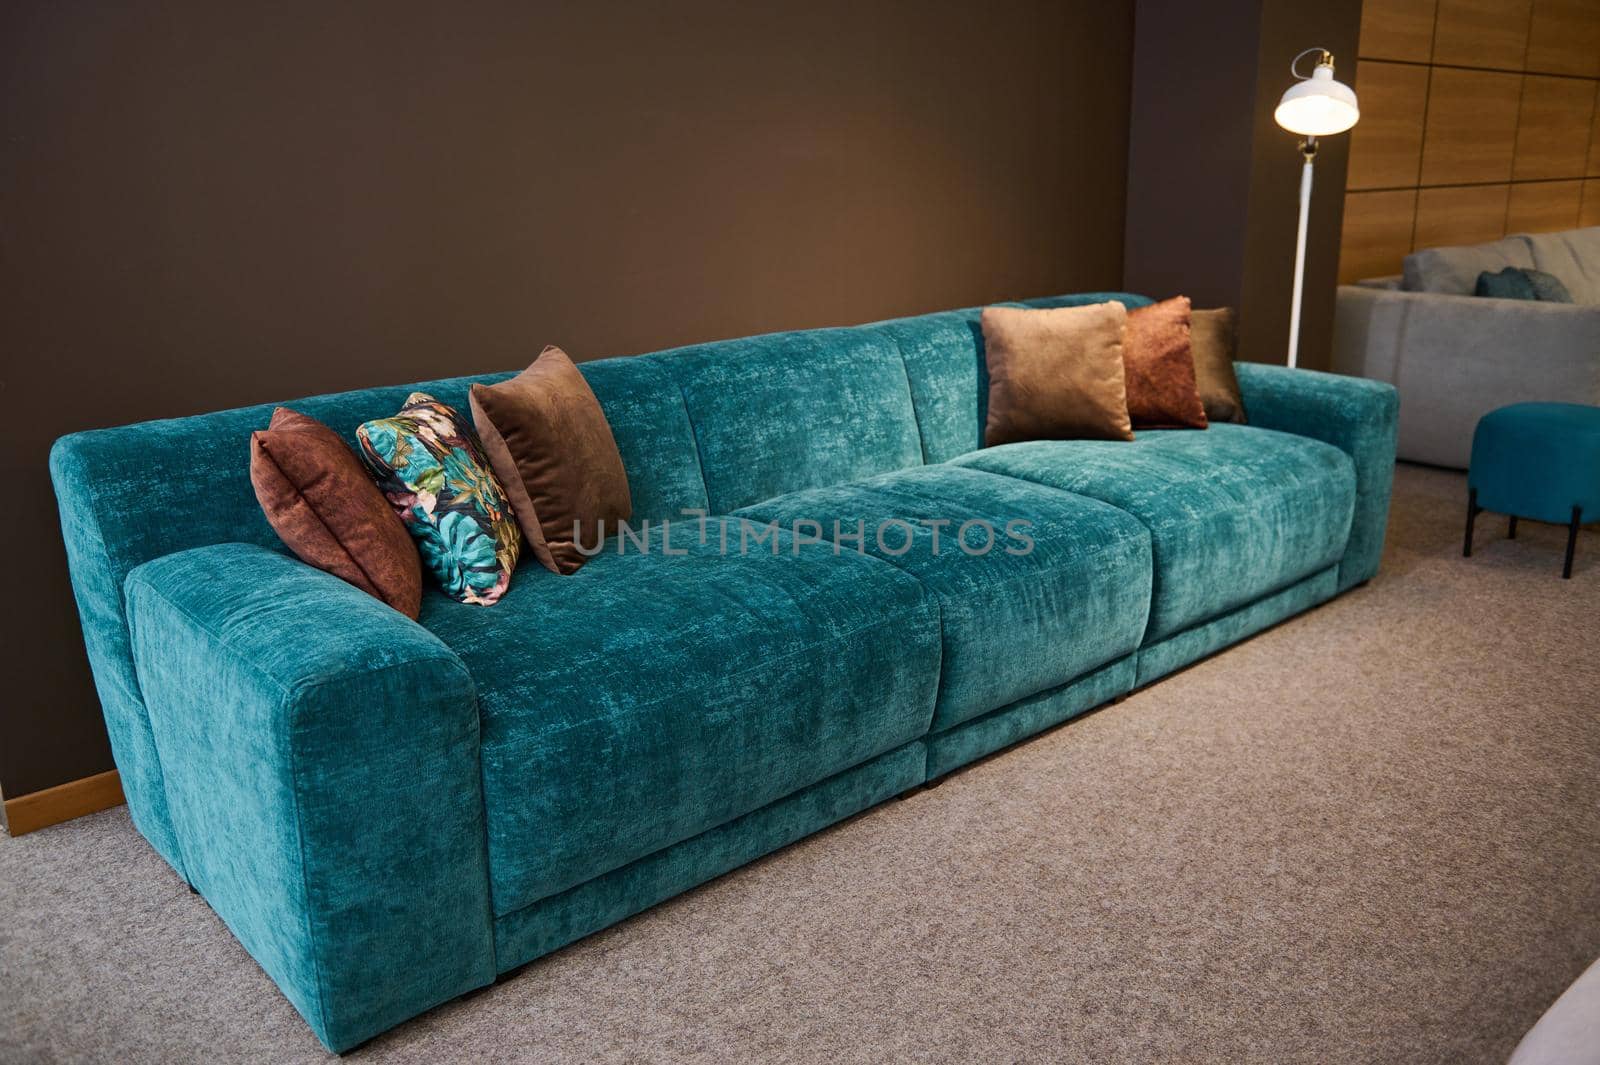 Exhibition of modern stylish upholstered furniture in the showroom of a furniture store. Focus on a turquoise soft velour settee and brown pillows lit by a lamp against a brown wall background by artgf